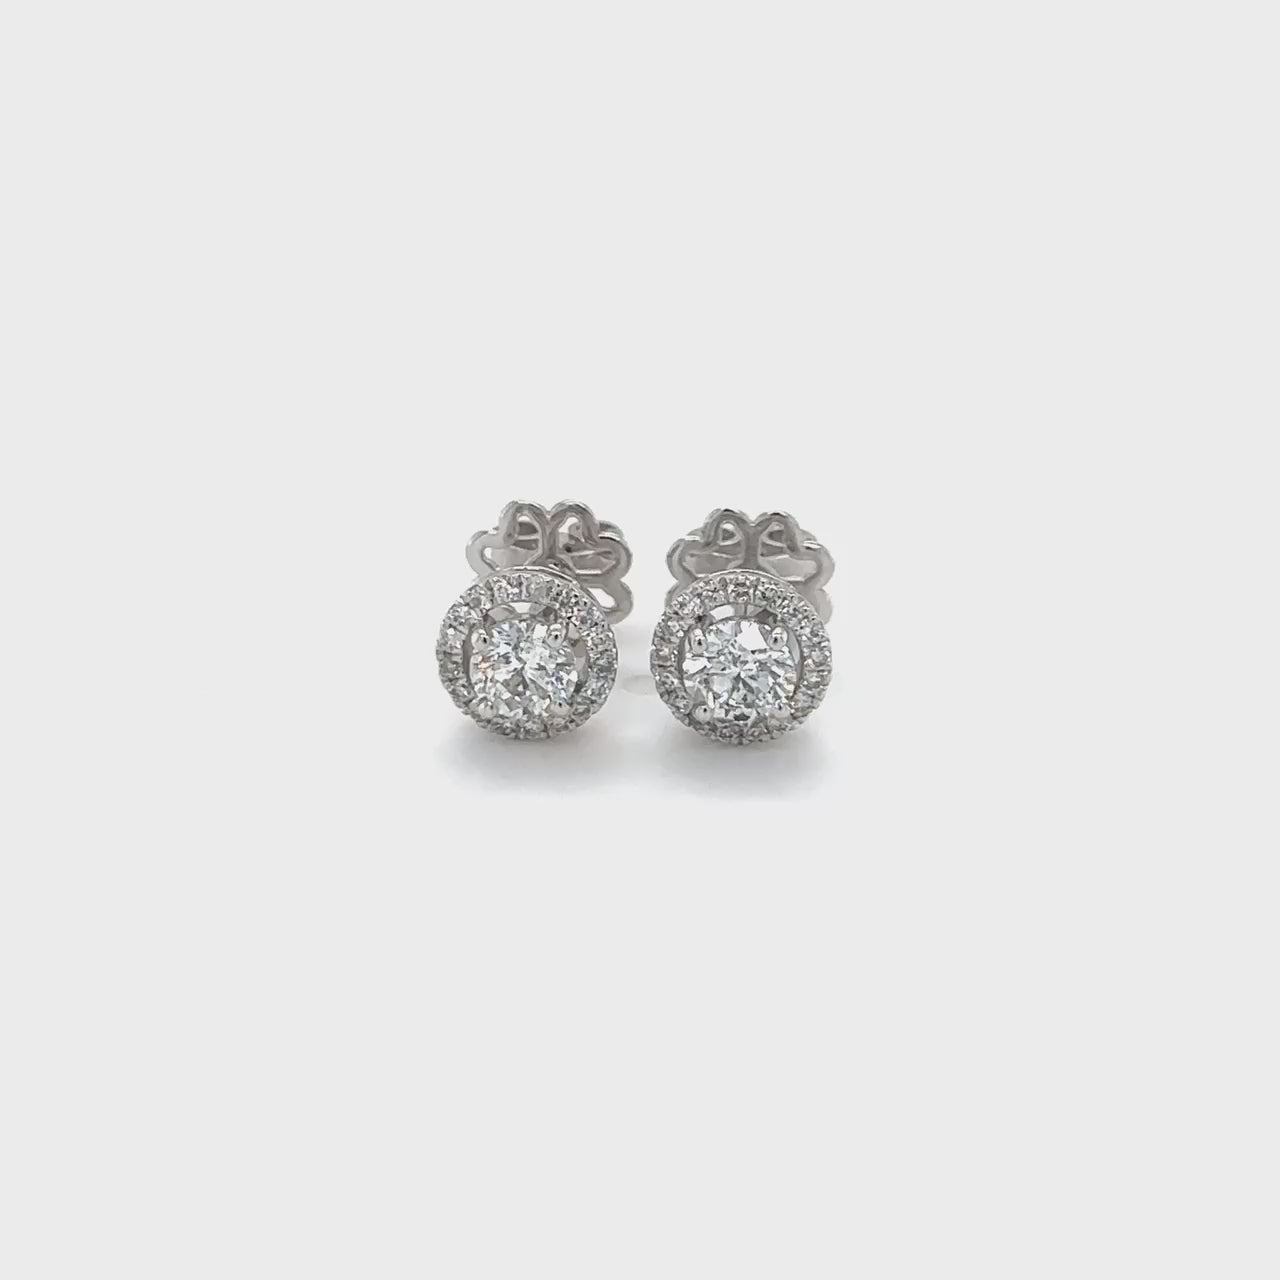 Round Brilliant Diamond Halo Stud Earrings: Sparkling studs, Brilliant halo diamonds, Classic elegance, Timeless sophistication, Perfect for any occasion, Versatile style, Radiant sparkle, Effortless glamour, Luxurious accessories, Must-have jewelry.